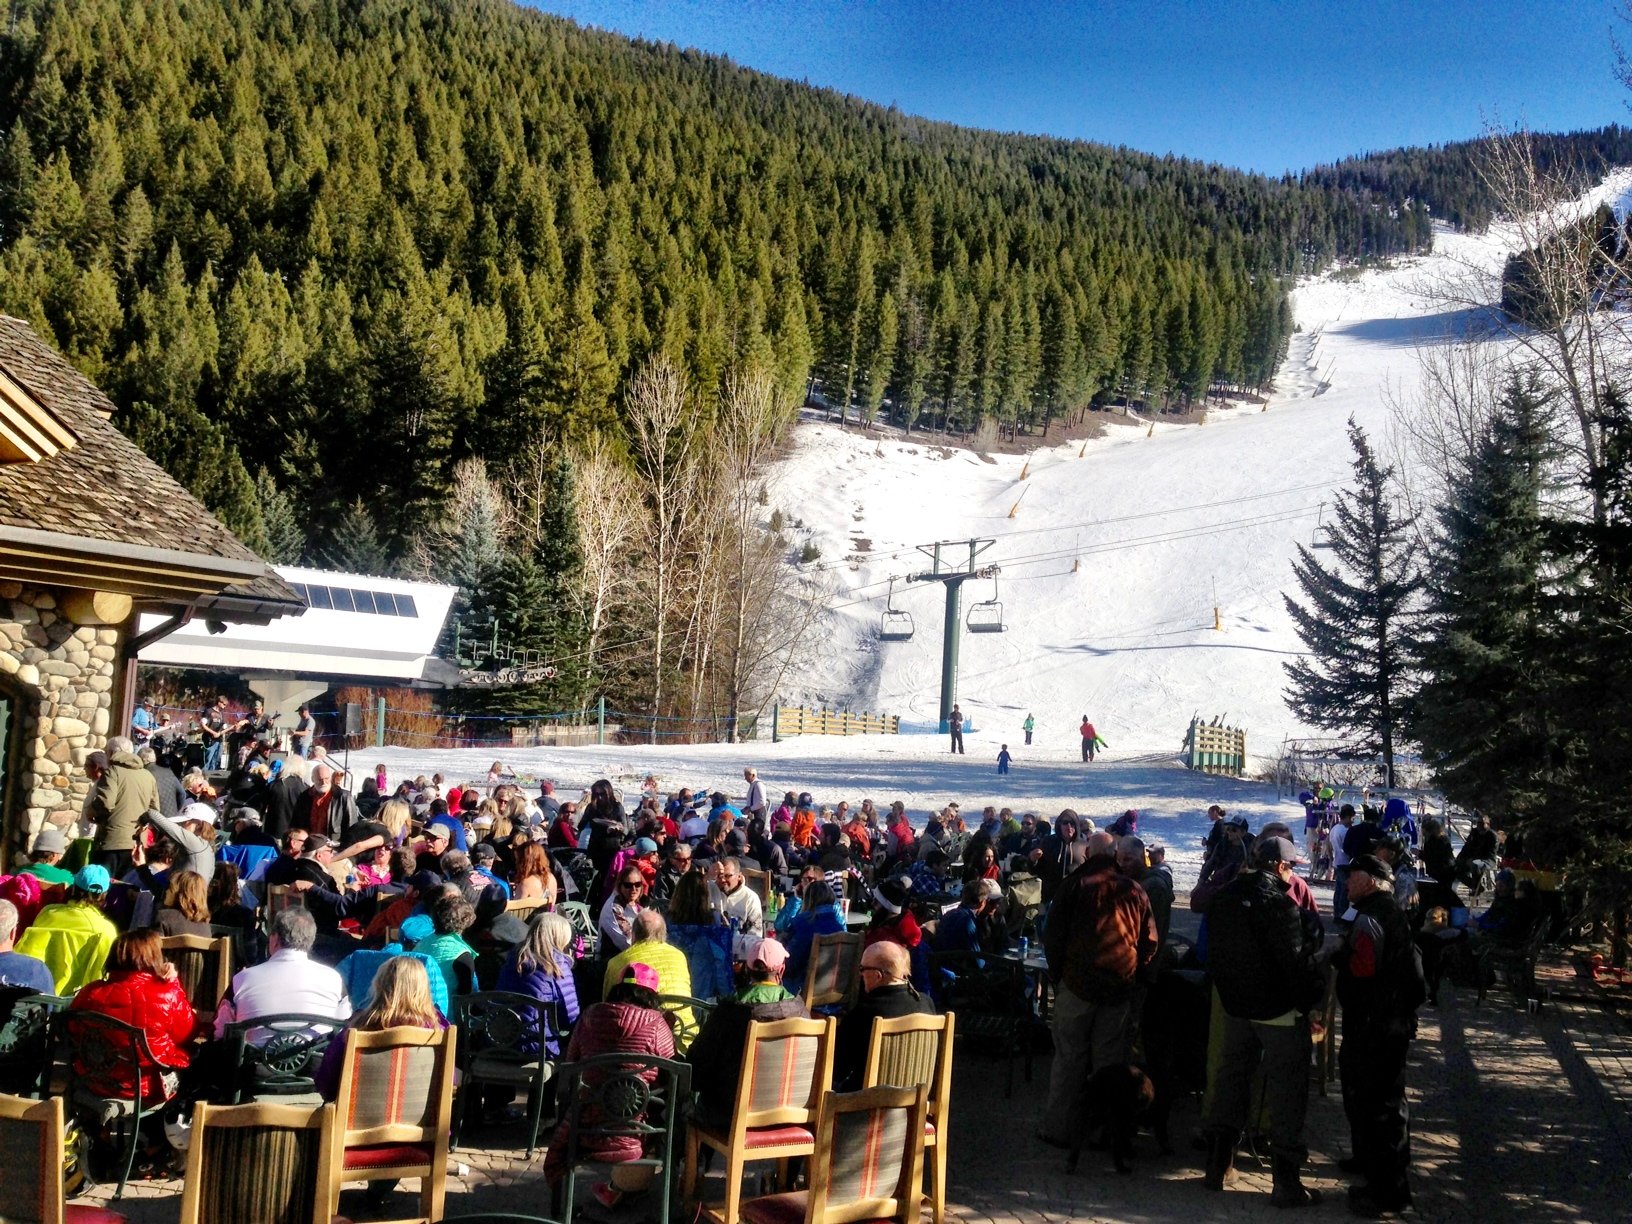 It's spring and it's a ski mountain, which means it's party time.  Endless sunbeams baking happy revelers in her glory.